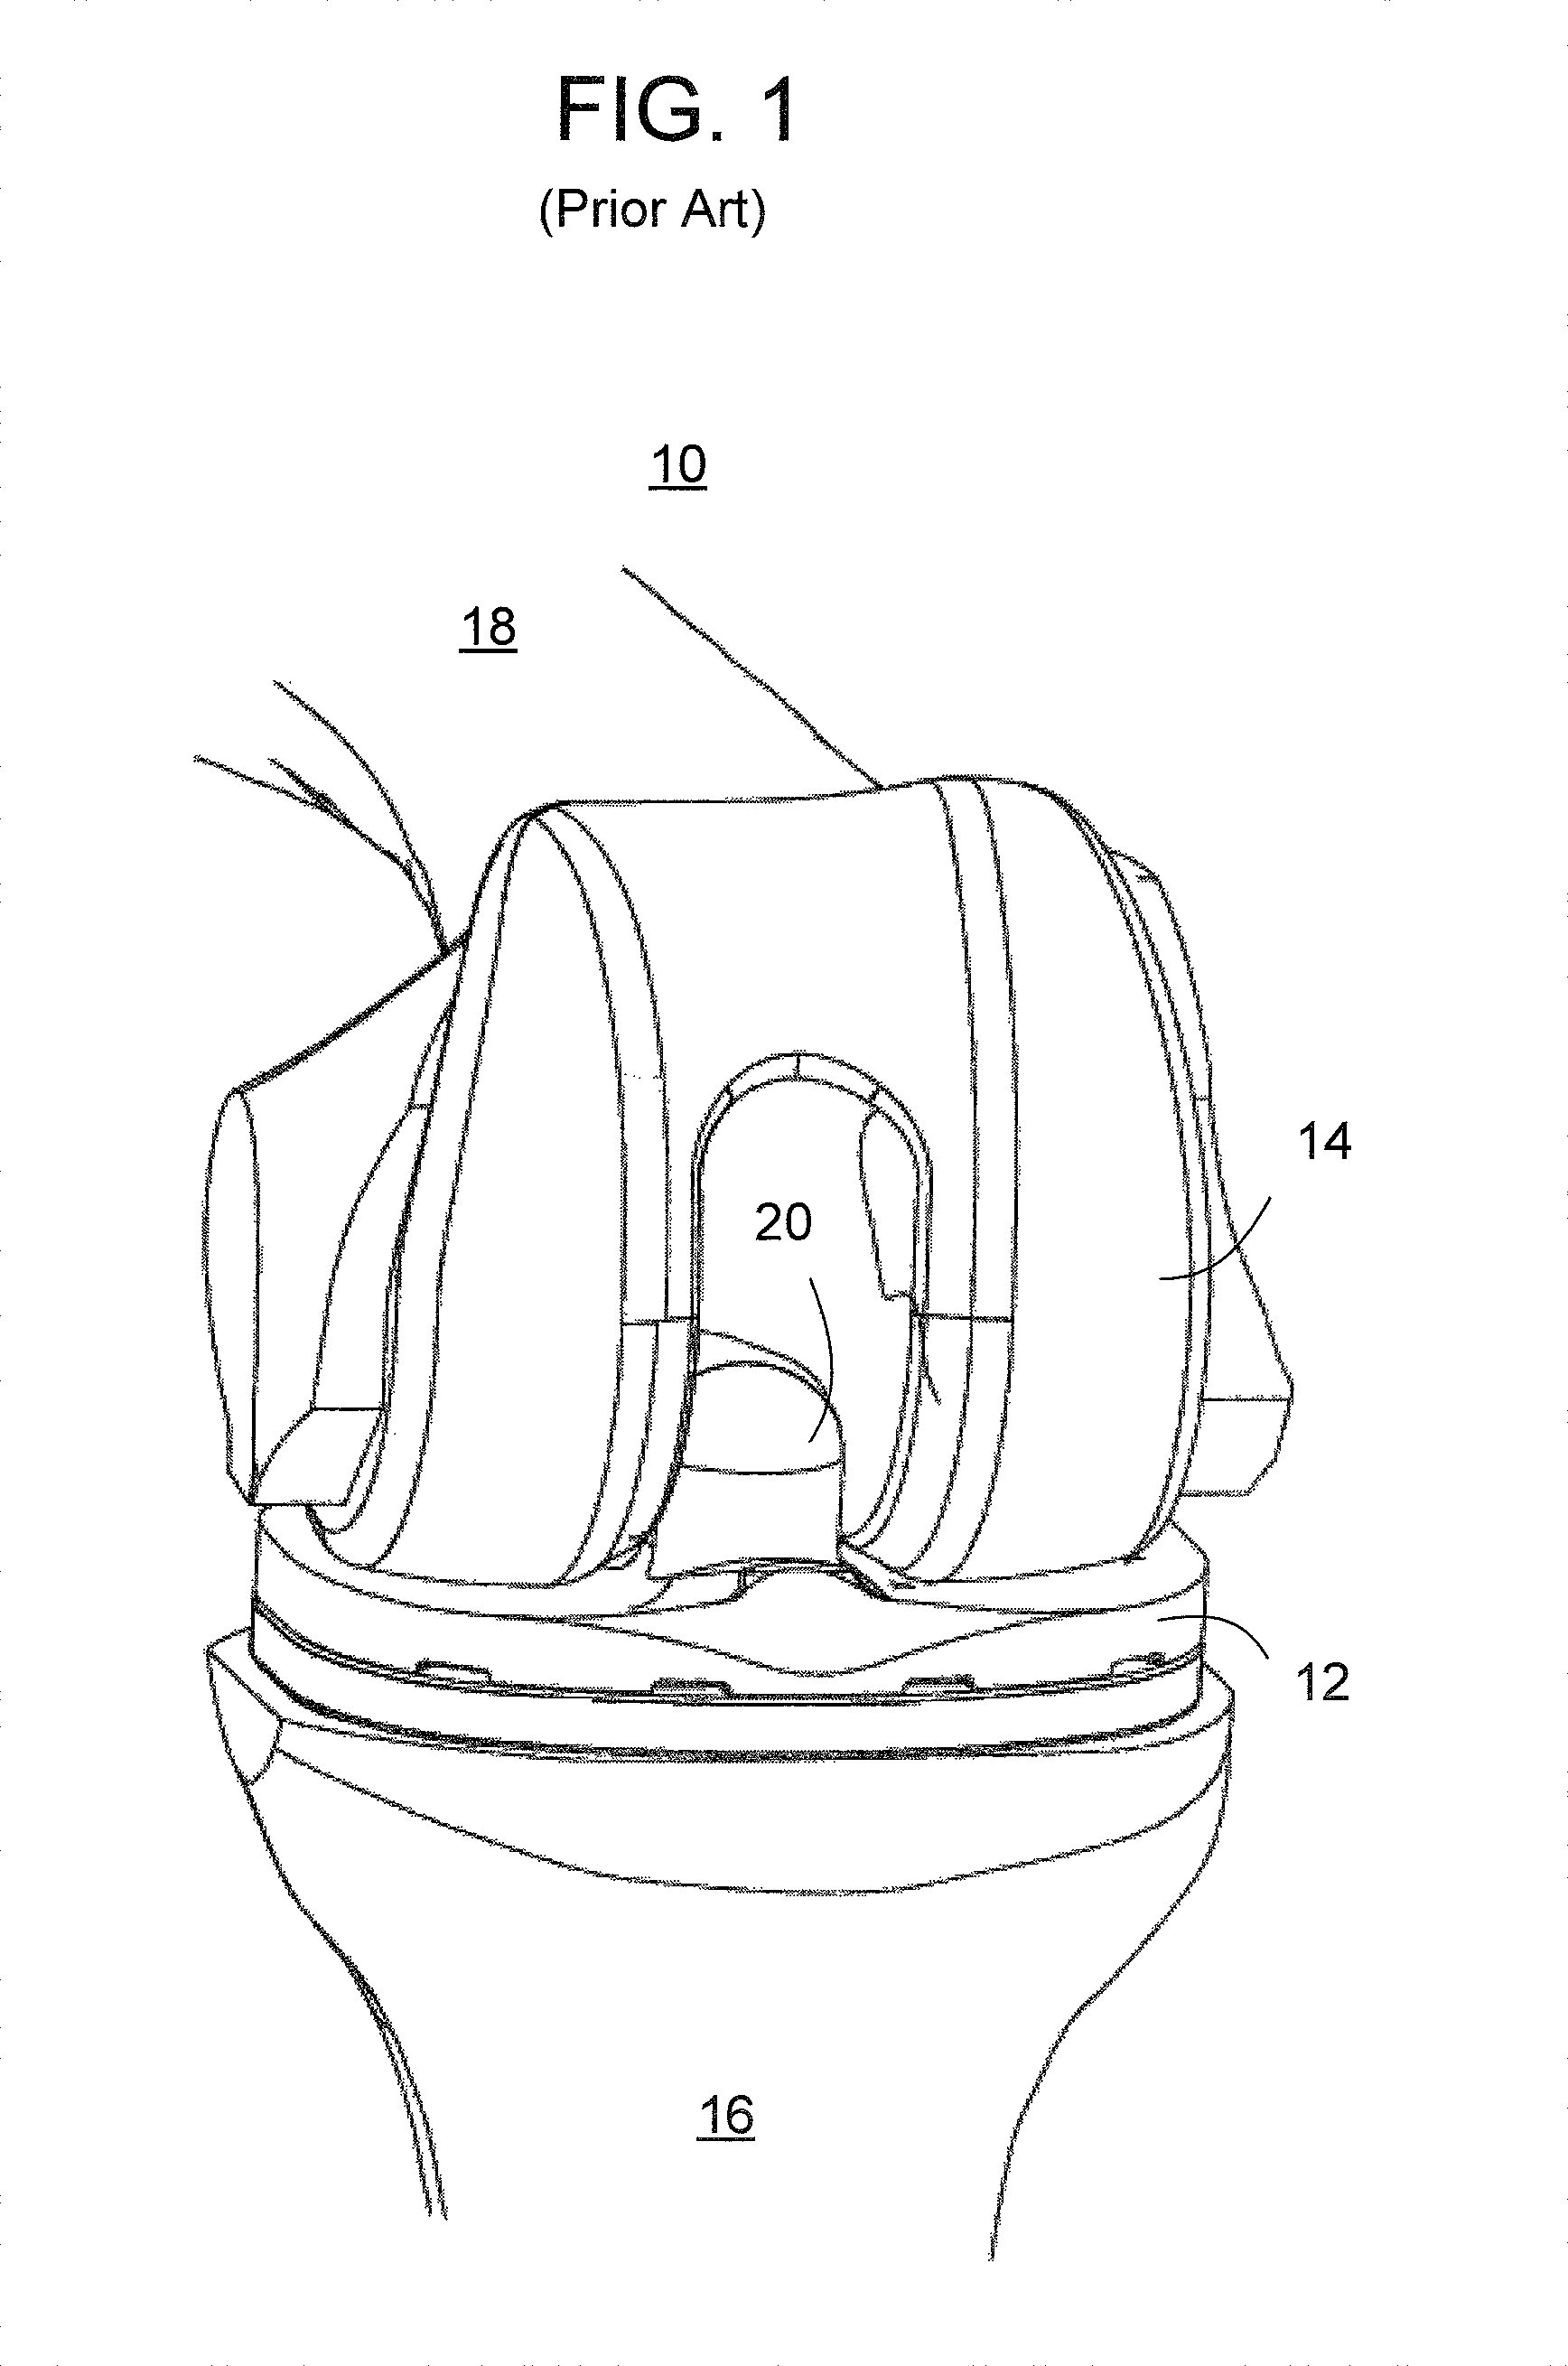 Methods and apparatus for preparing an intercondylar area of a distal femur